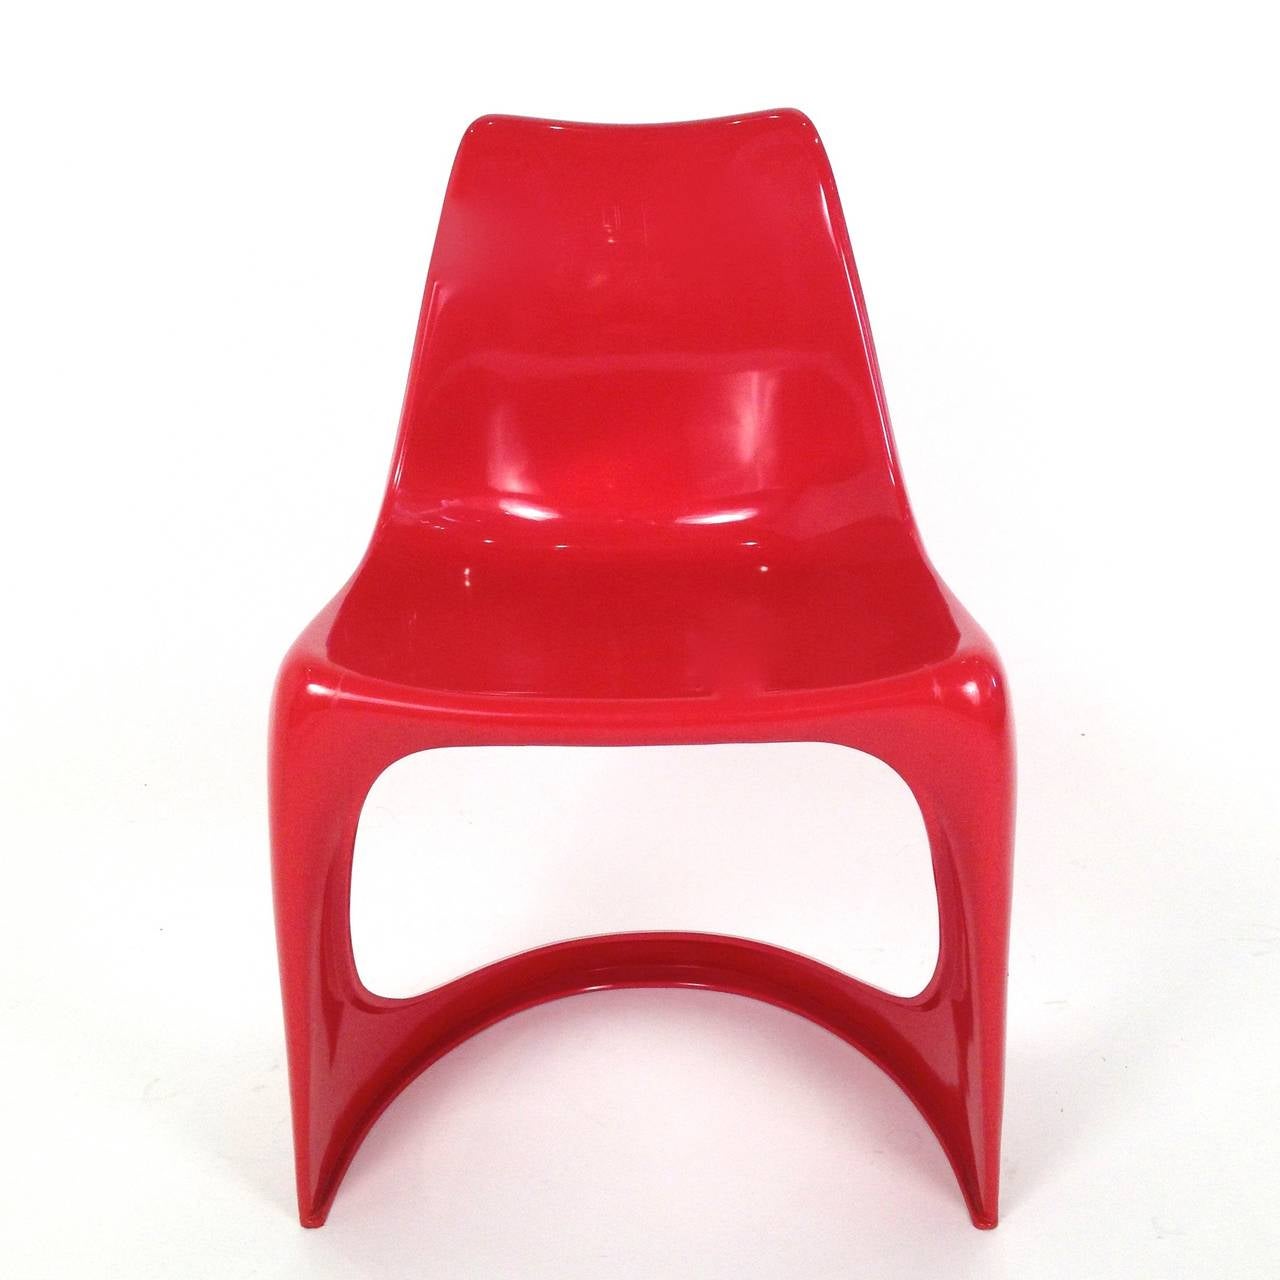 Vintage Danish cherry red molded plastic chairs in the manner of Verner Panton.